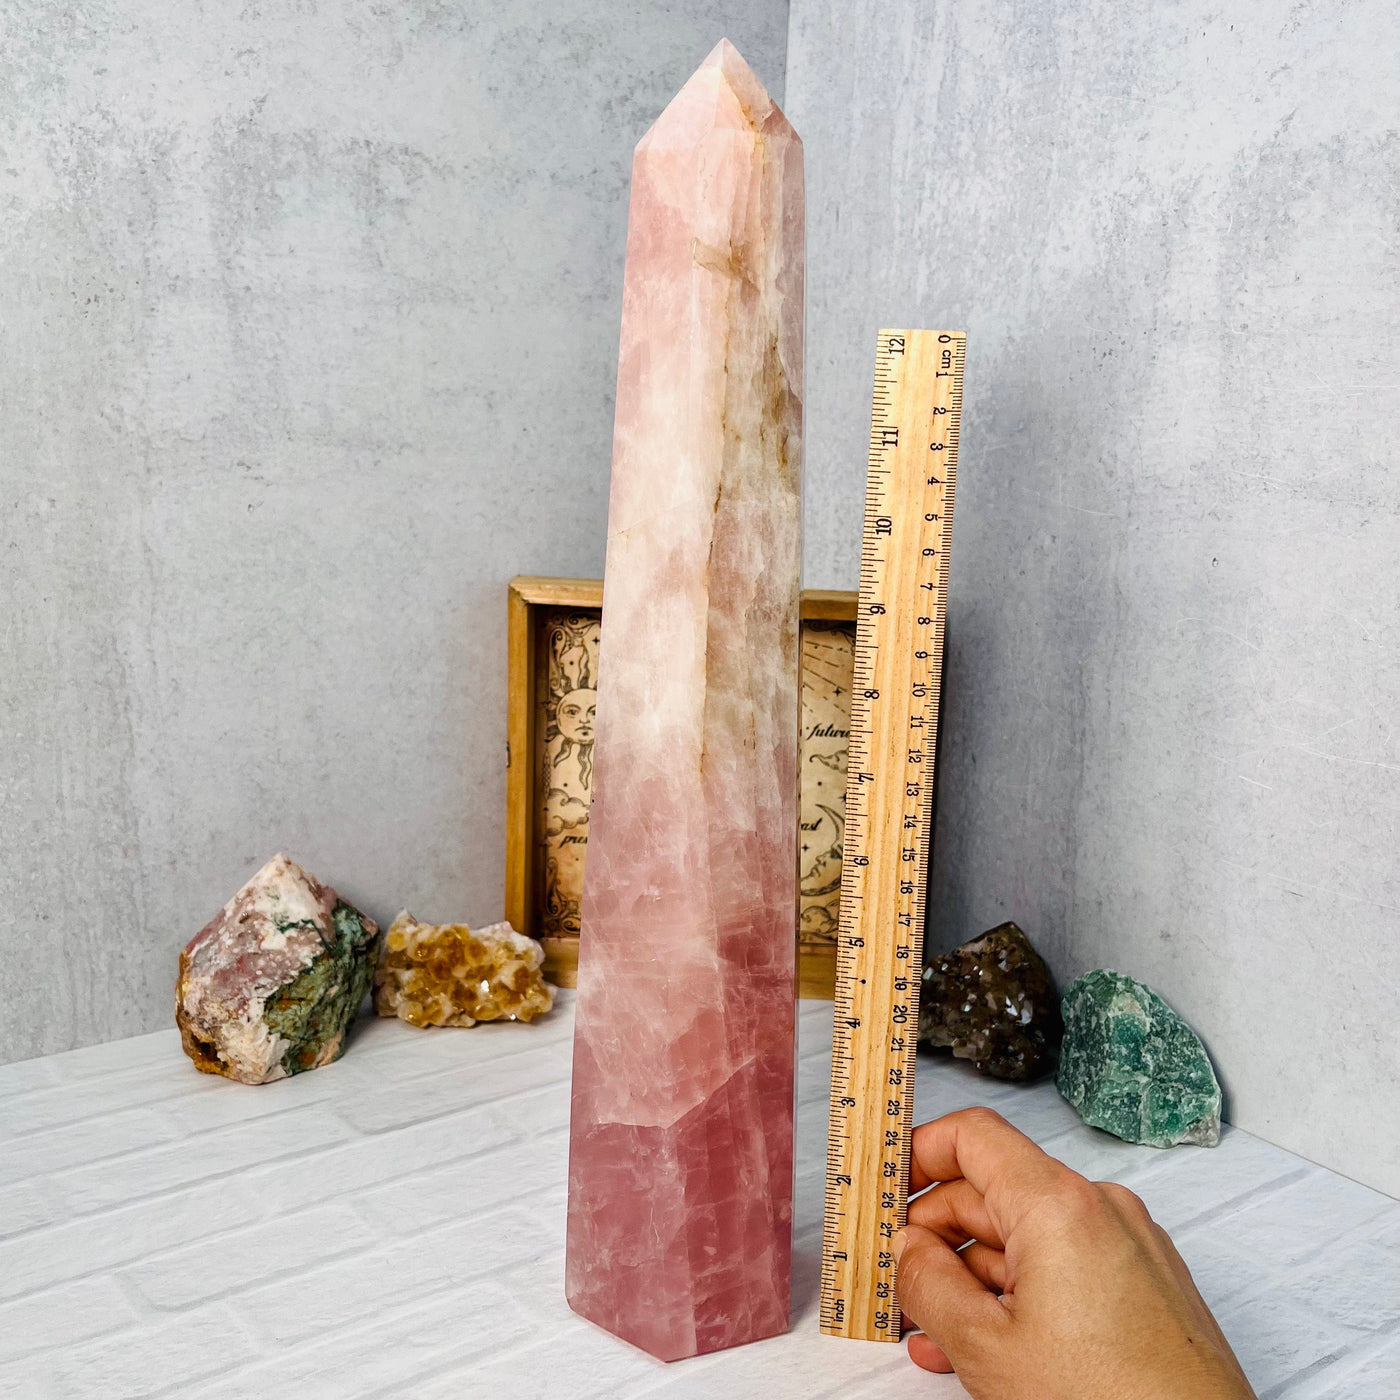 Side view of the Rose Quartz Polished Tower, placed next to an upright ruler for size reference.